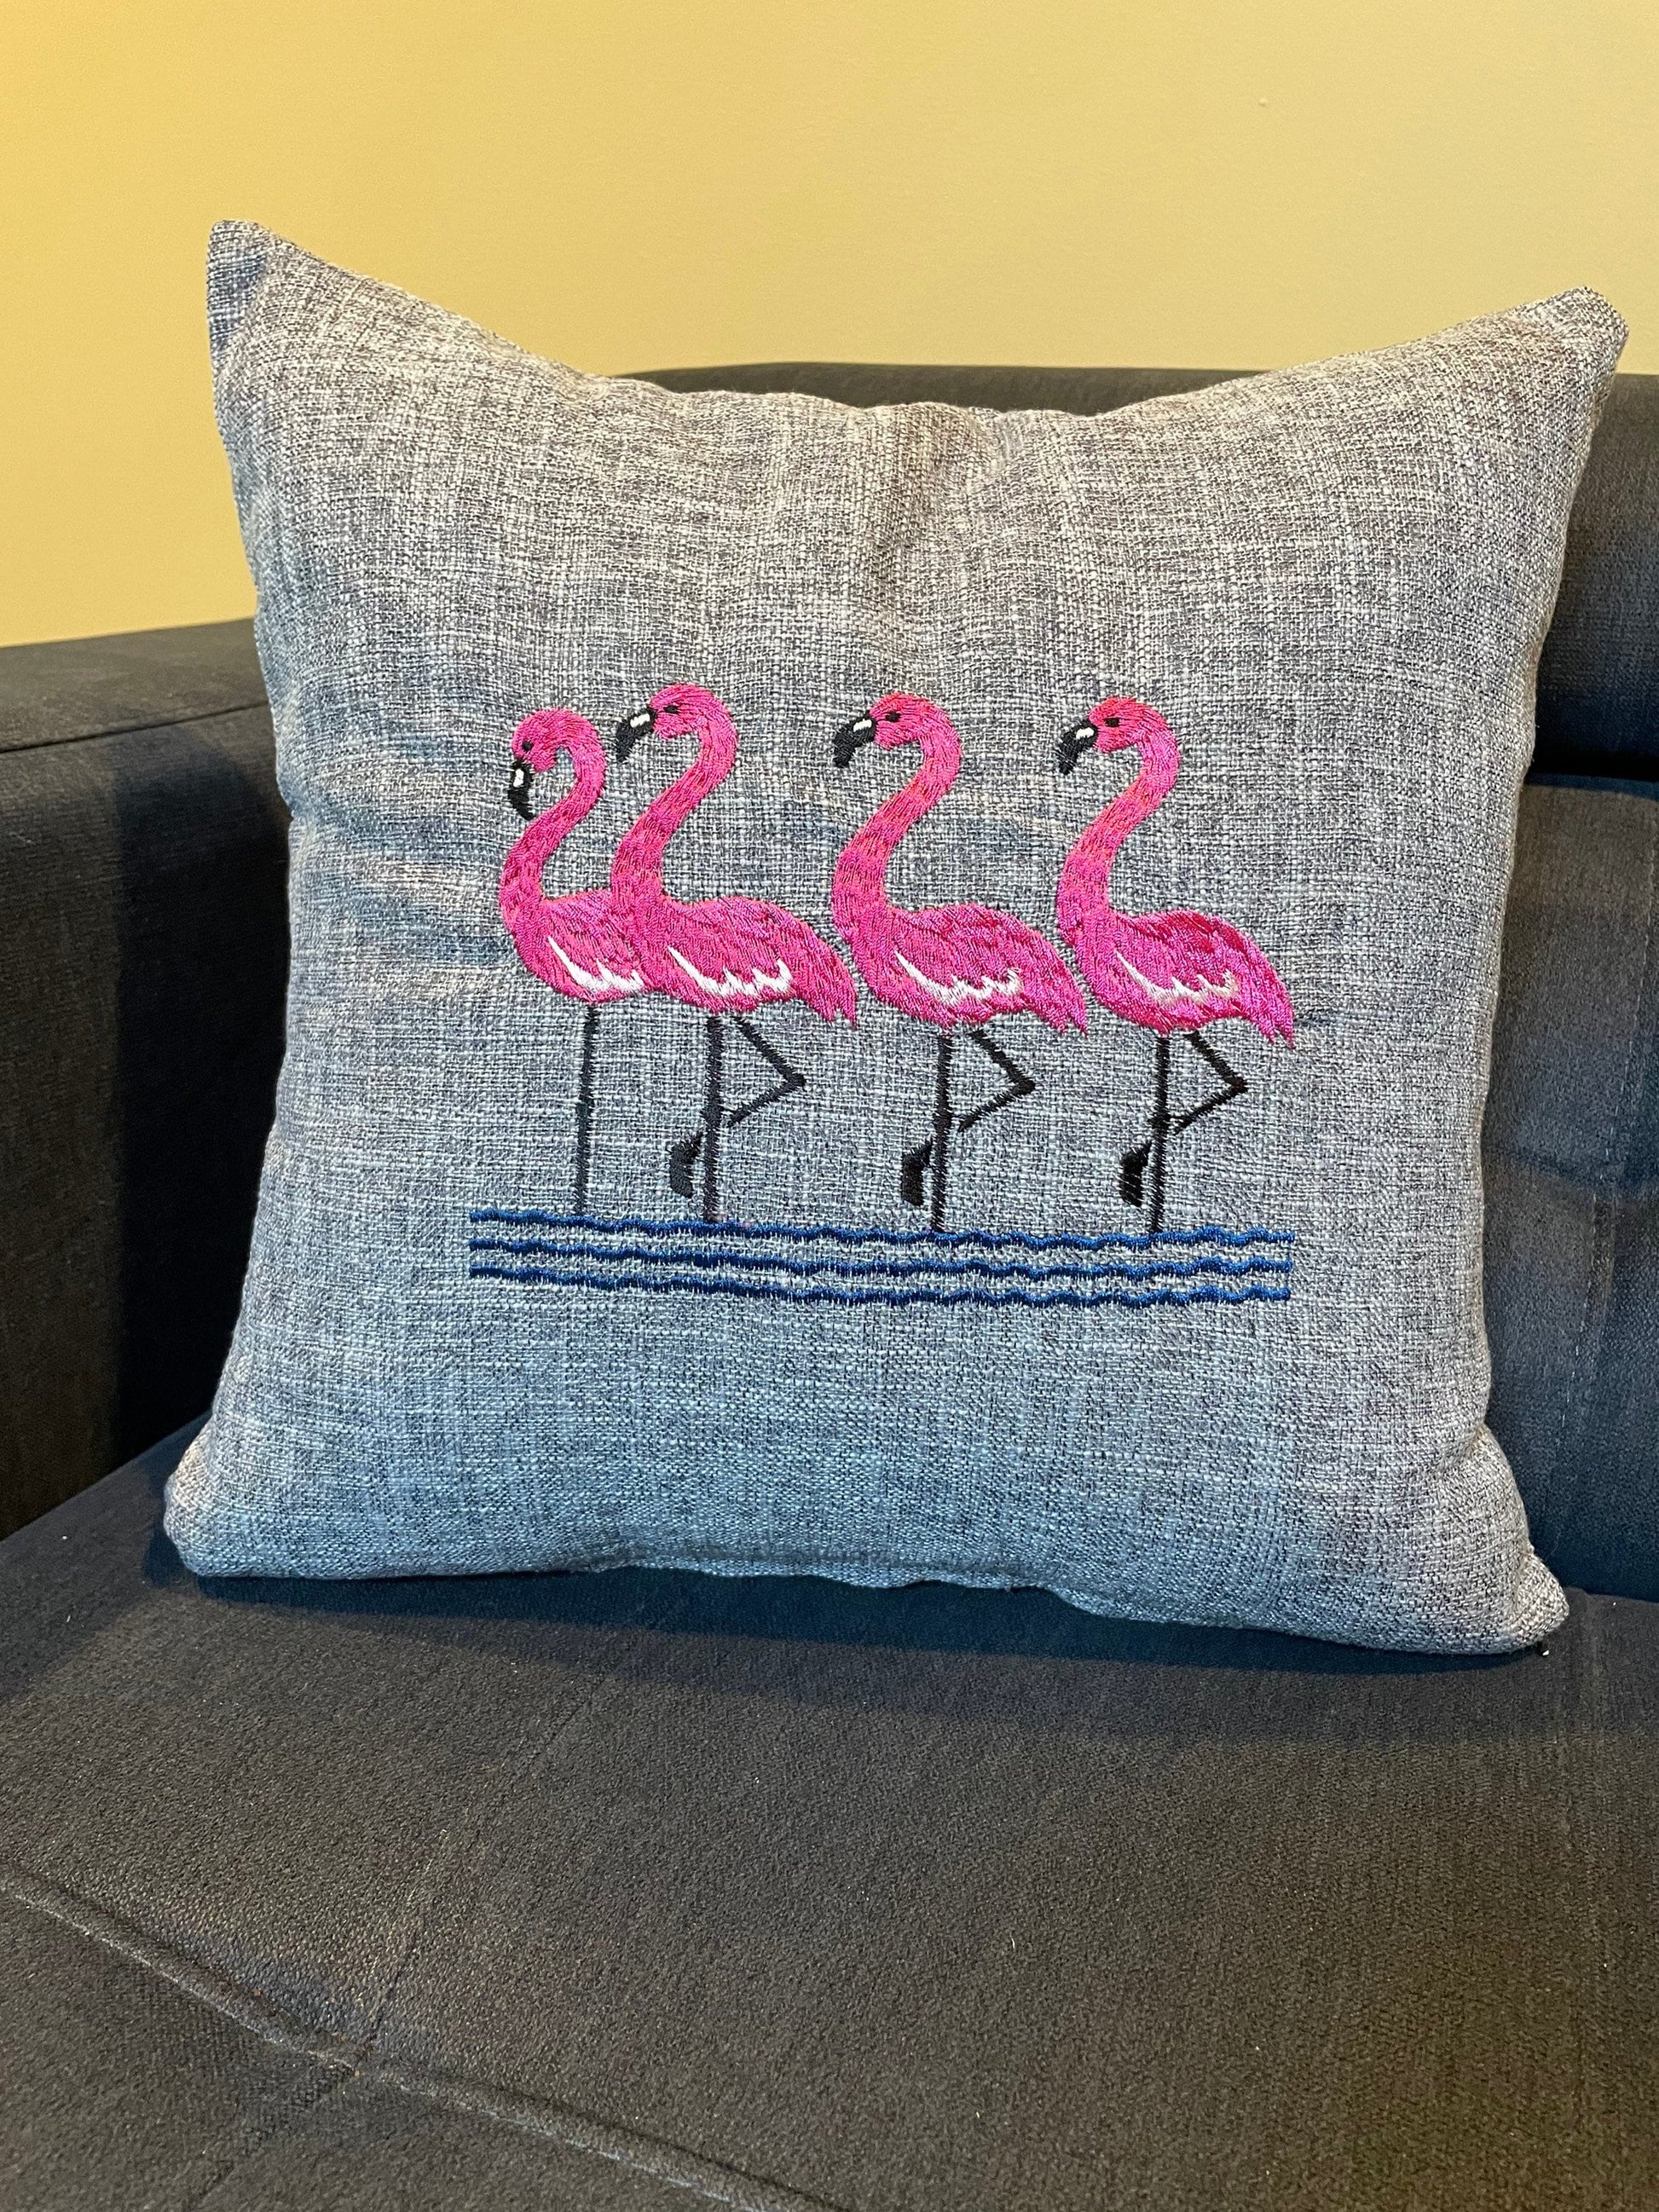 Flamingos Embroidered Throw Pillow Cover. Cotton decorative pillow cover | 16” x 16”